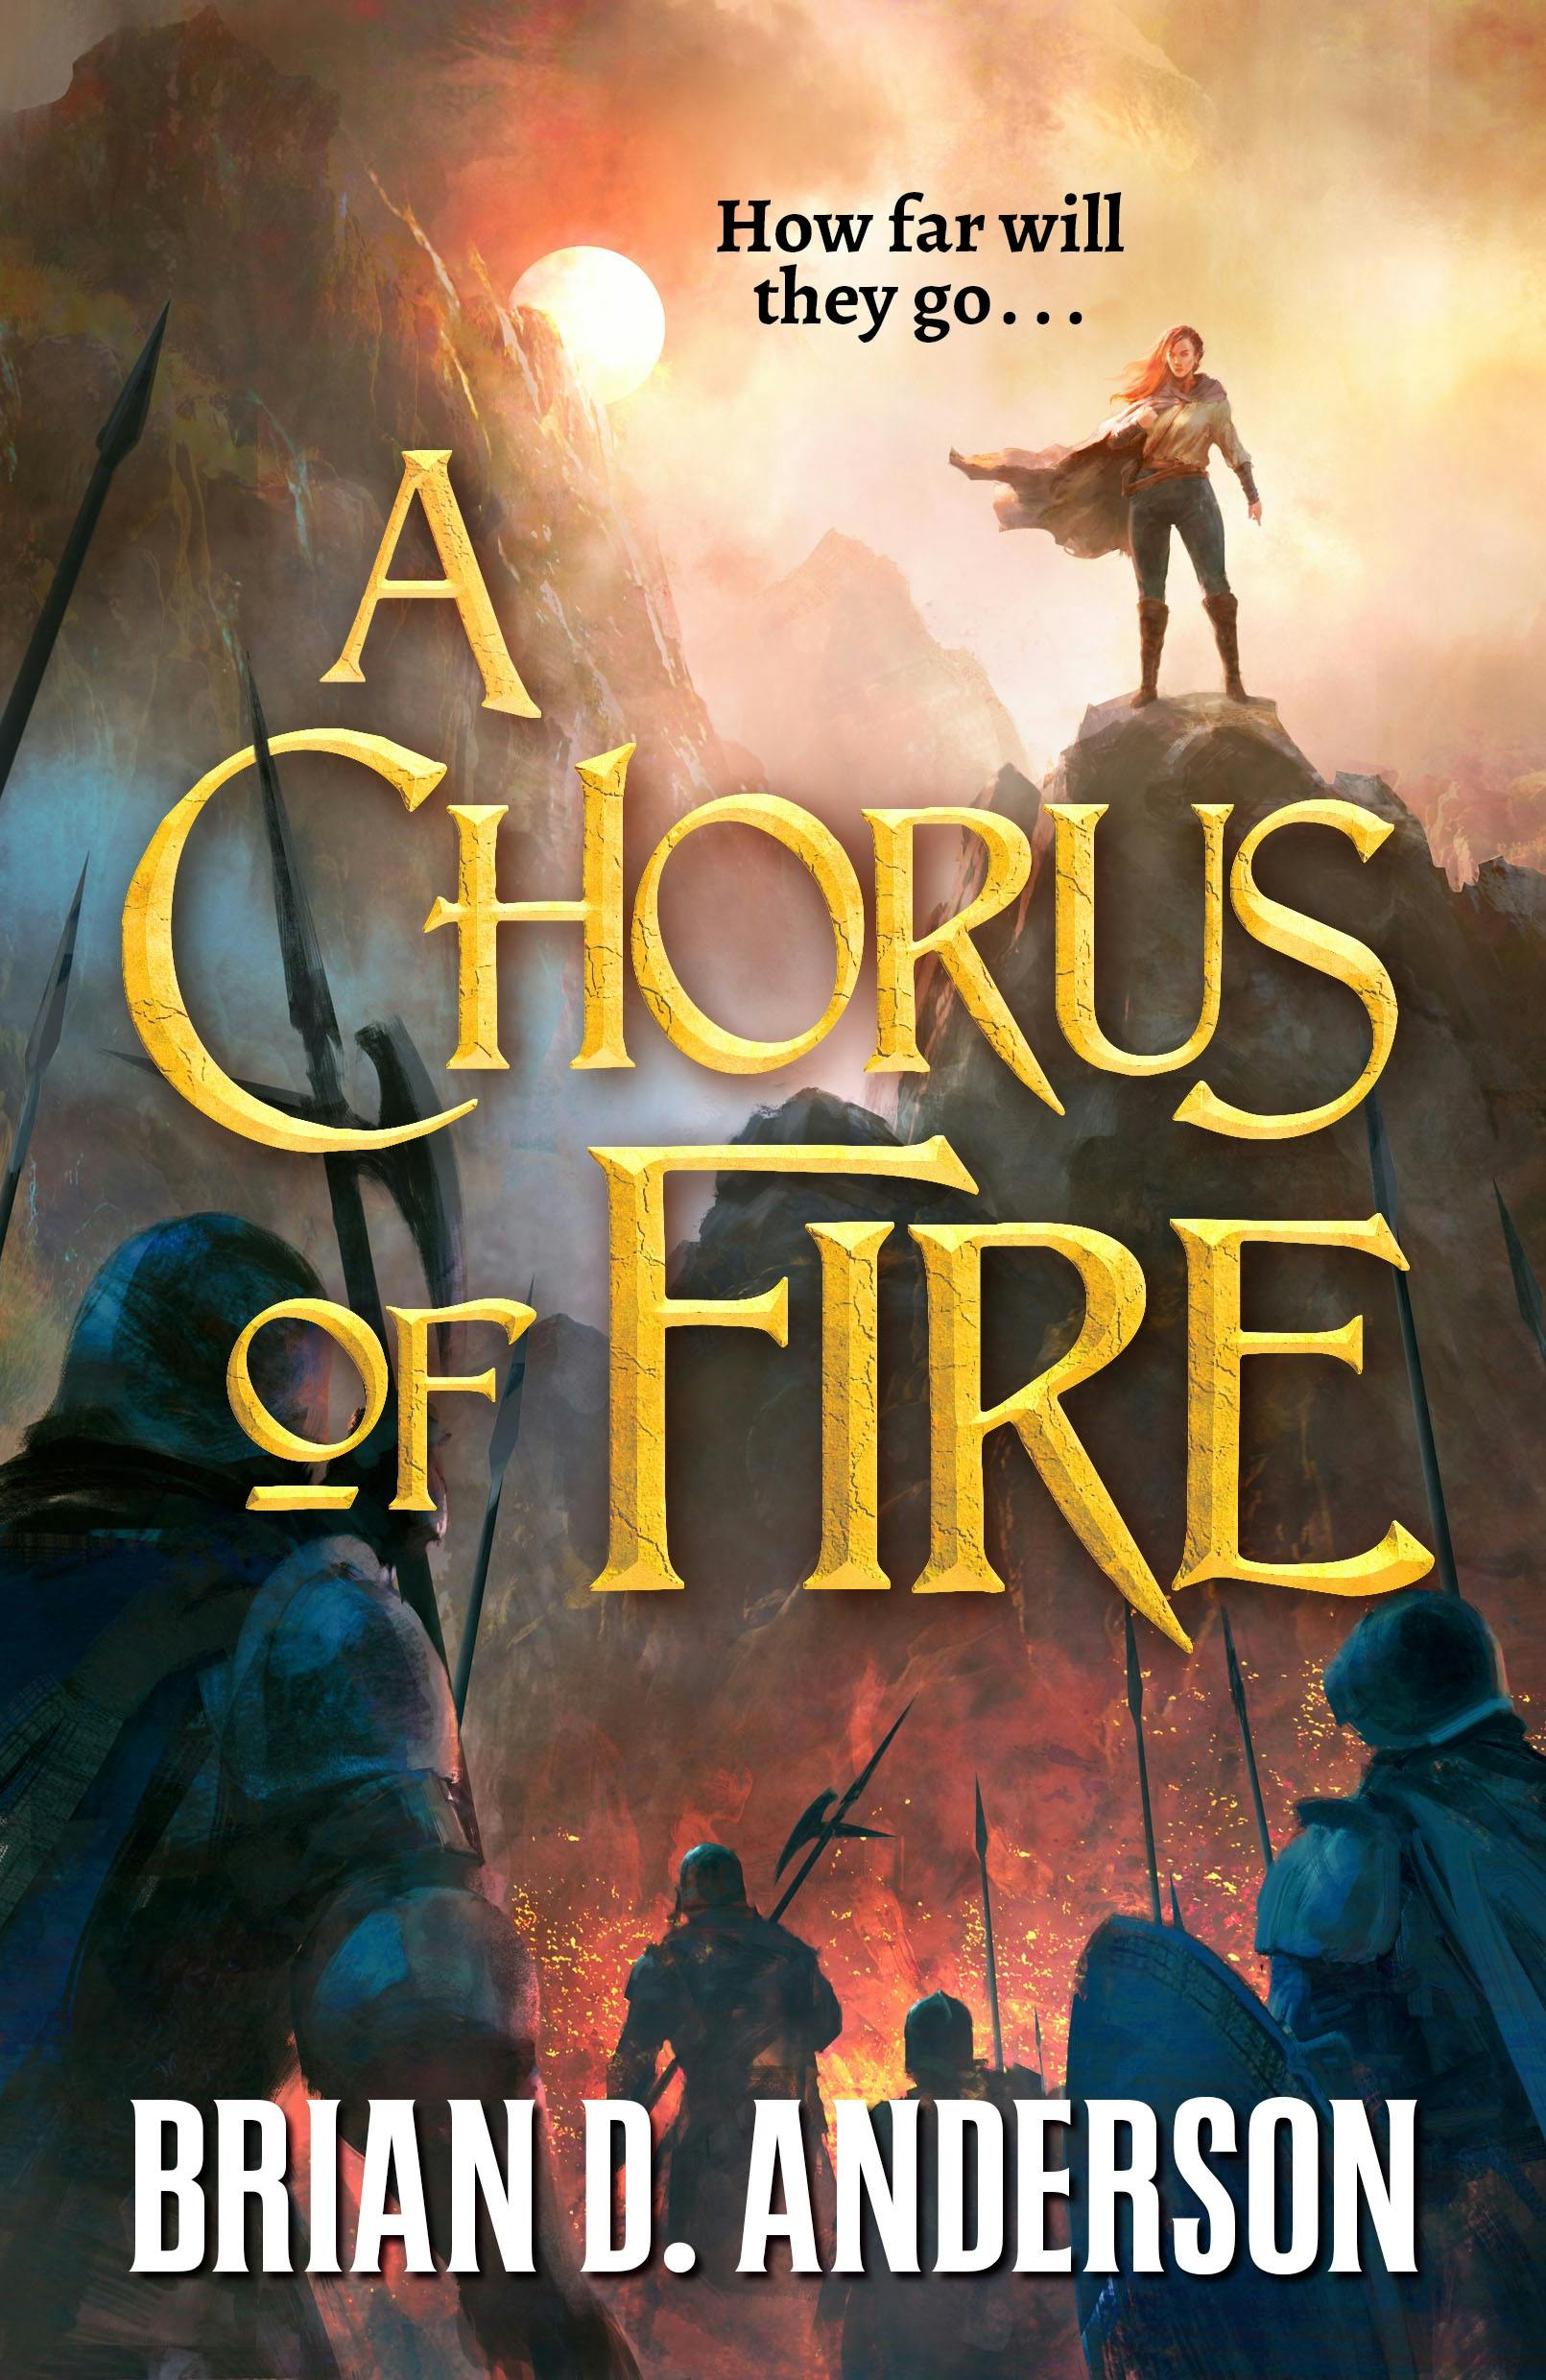 Cover for the book titled as: A Chorus of Fire